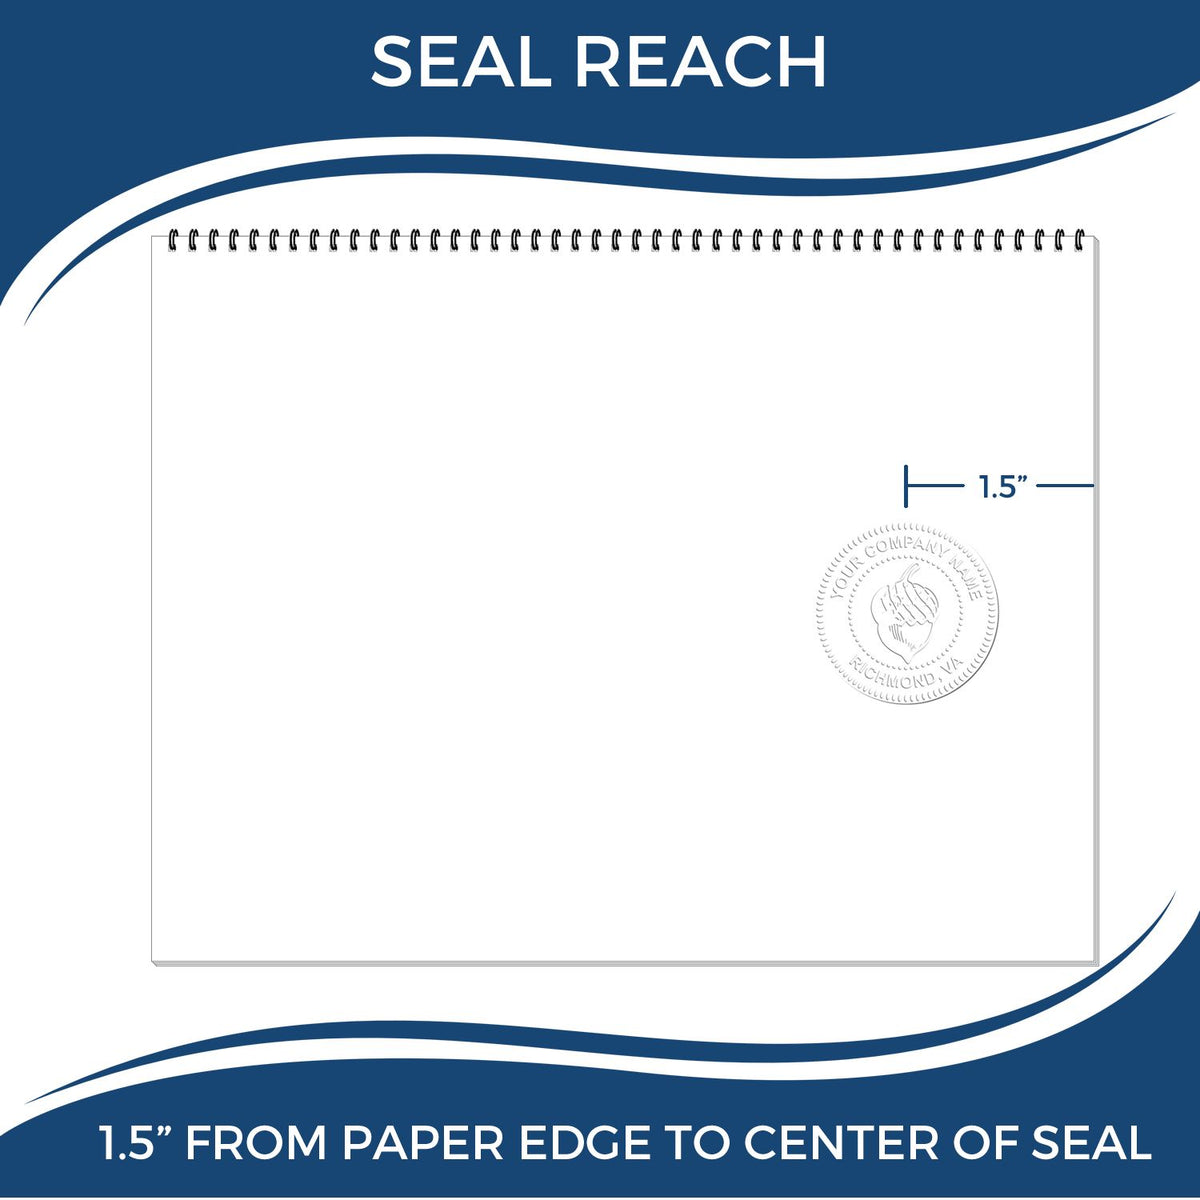 An infographic showing the seal reach which is represented by a ruler and a miniature seal image of the Hybrid Ohio Land Surveyor Seal